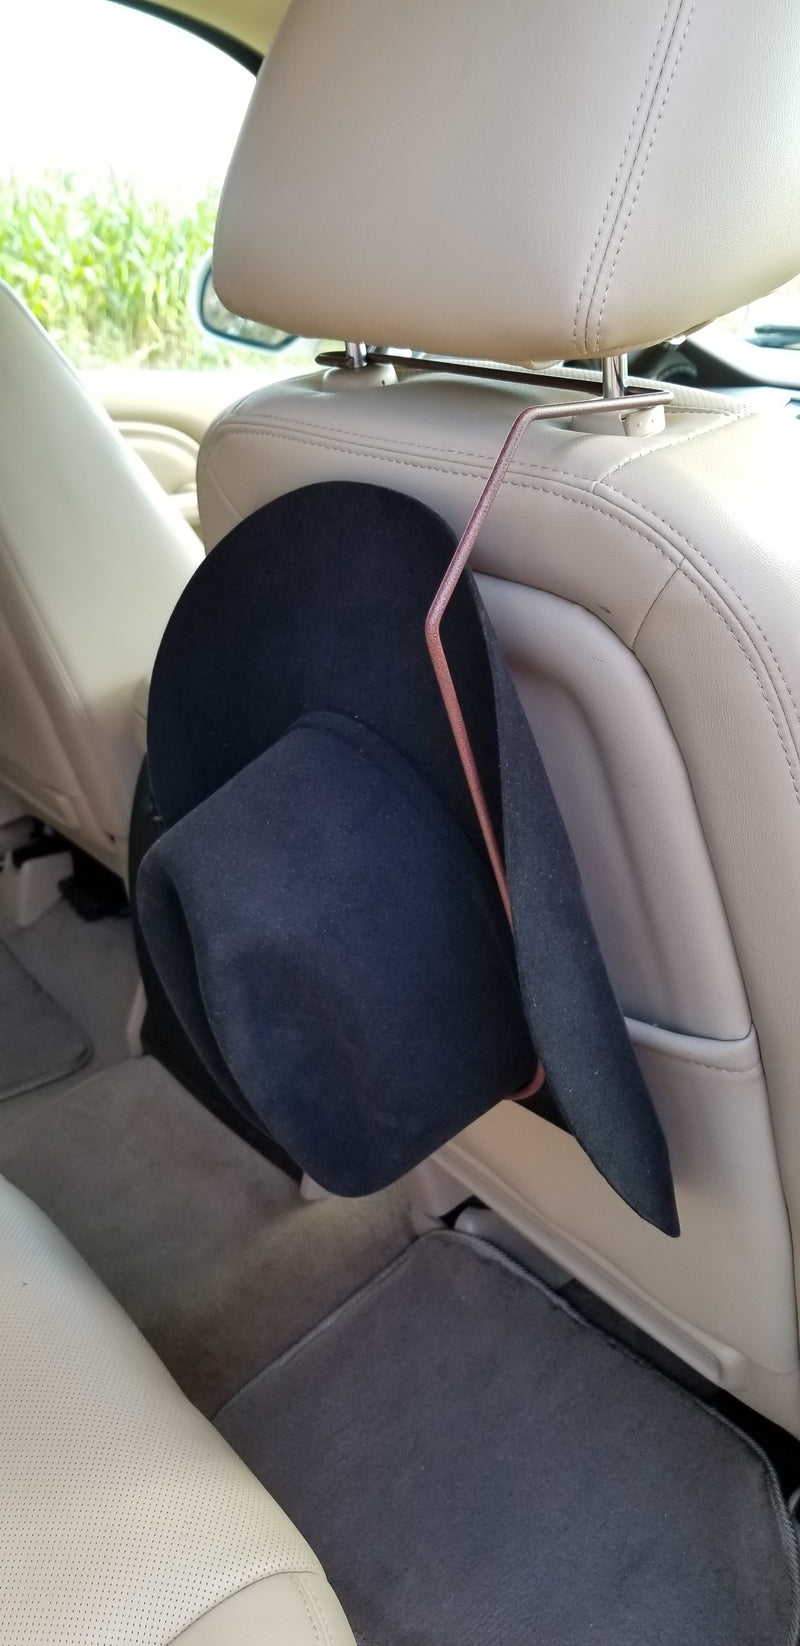 Made in the USA Truck/SUV Cowboy Hat Holder